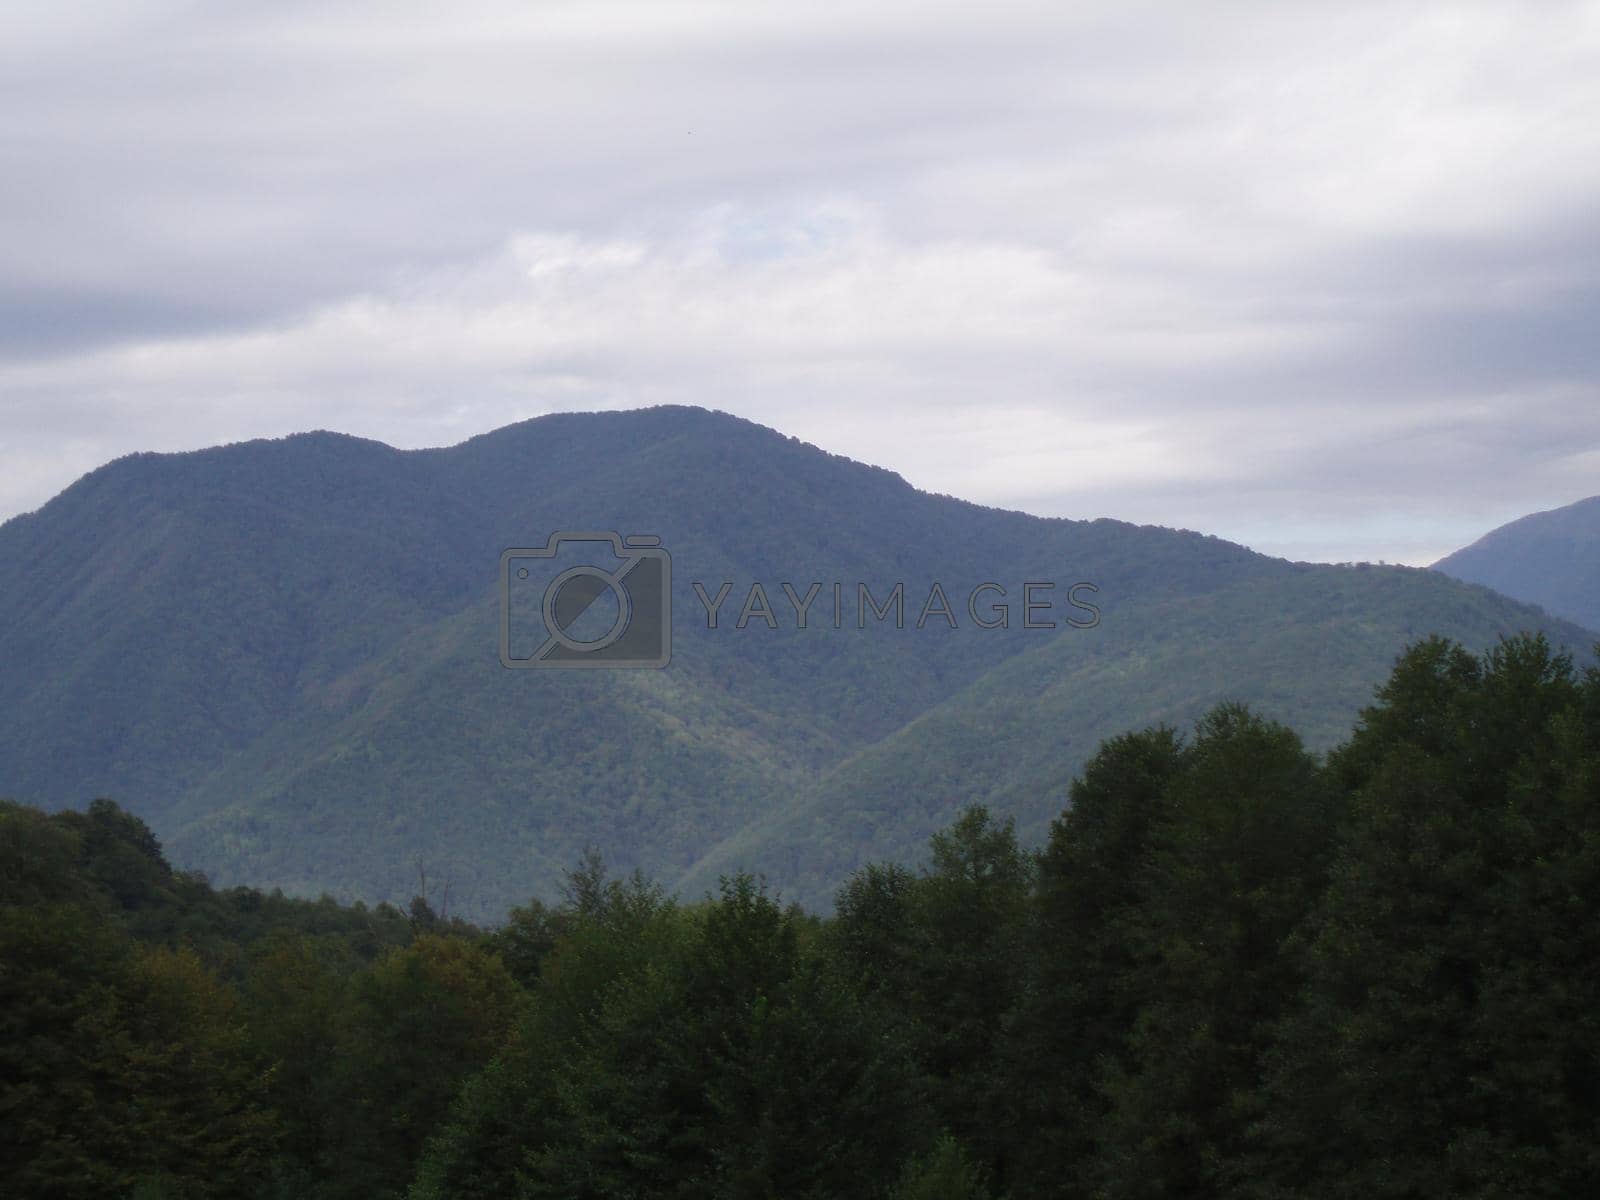 Royalty free image of A panorama mountain landscape with valleys and forest mountain peaks under an overcast and cloudy sky by Olga_OLiAN